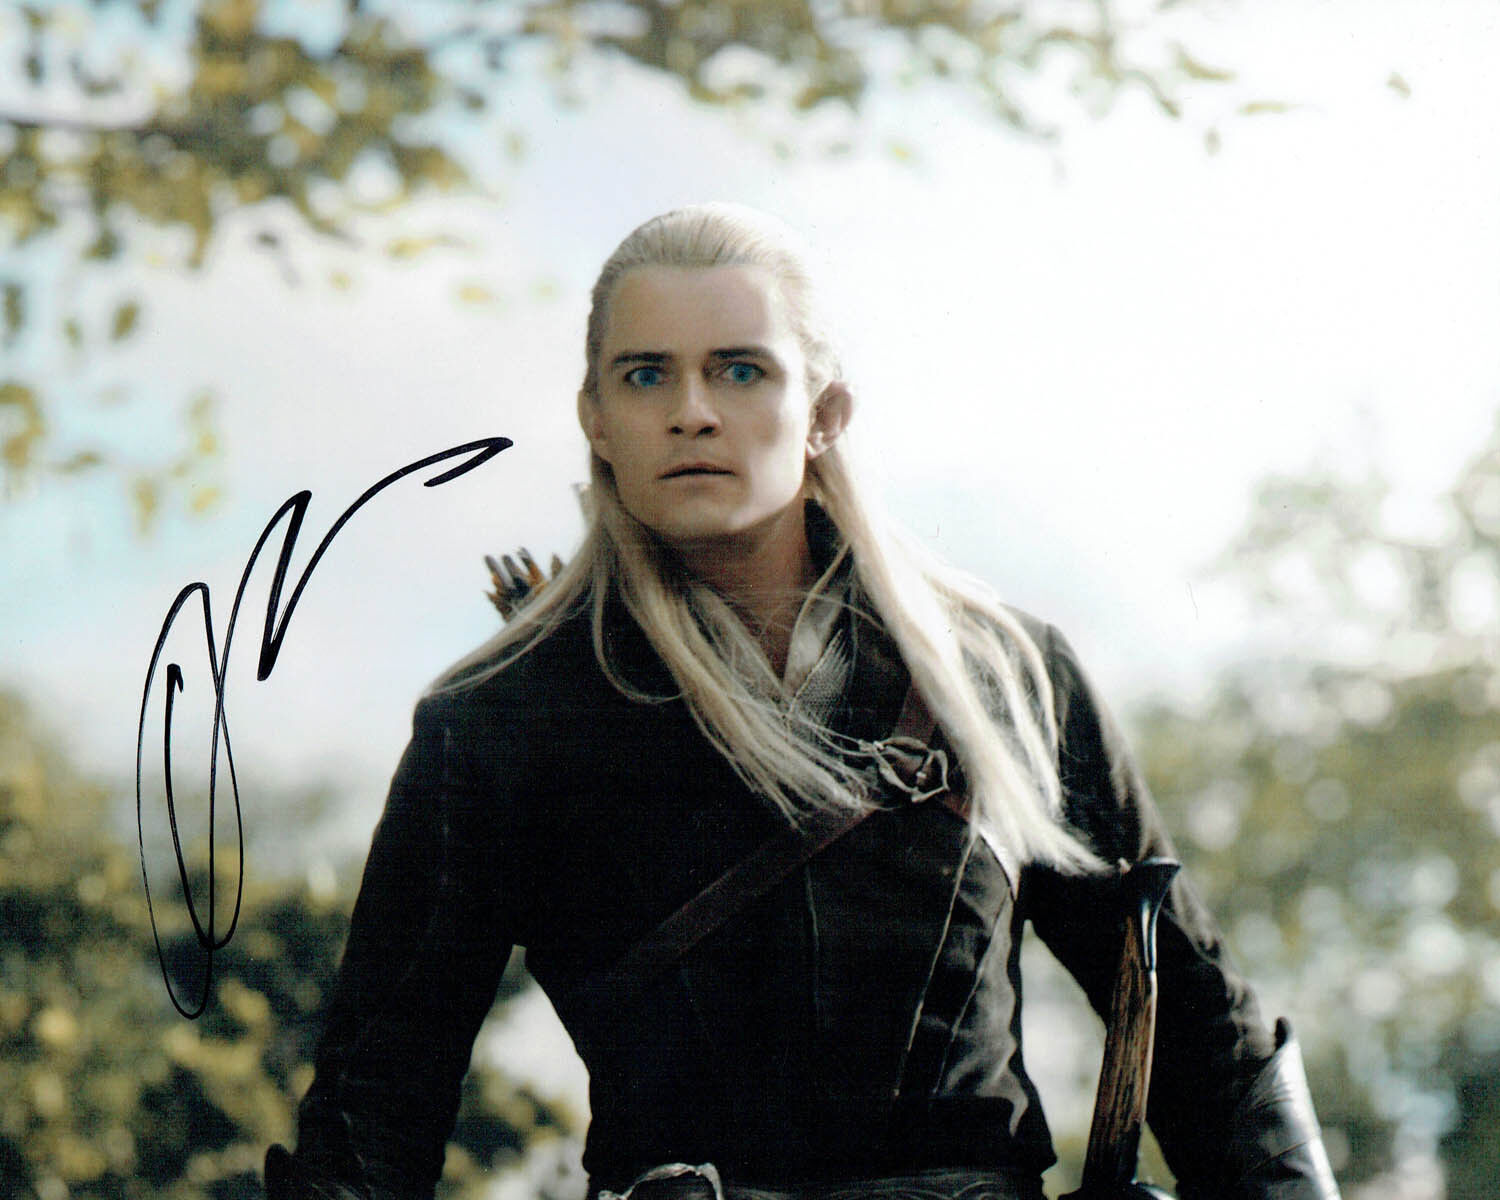 Orlando BLOOM Signed Autograph 10x8 Photo Poster painting Lord of the Rings Legolas AFTAL COA